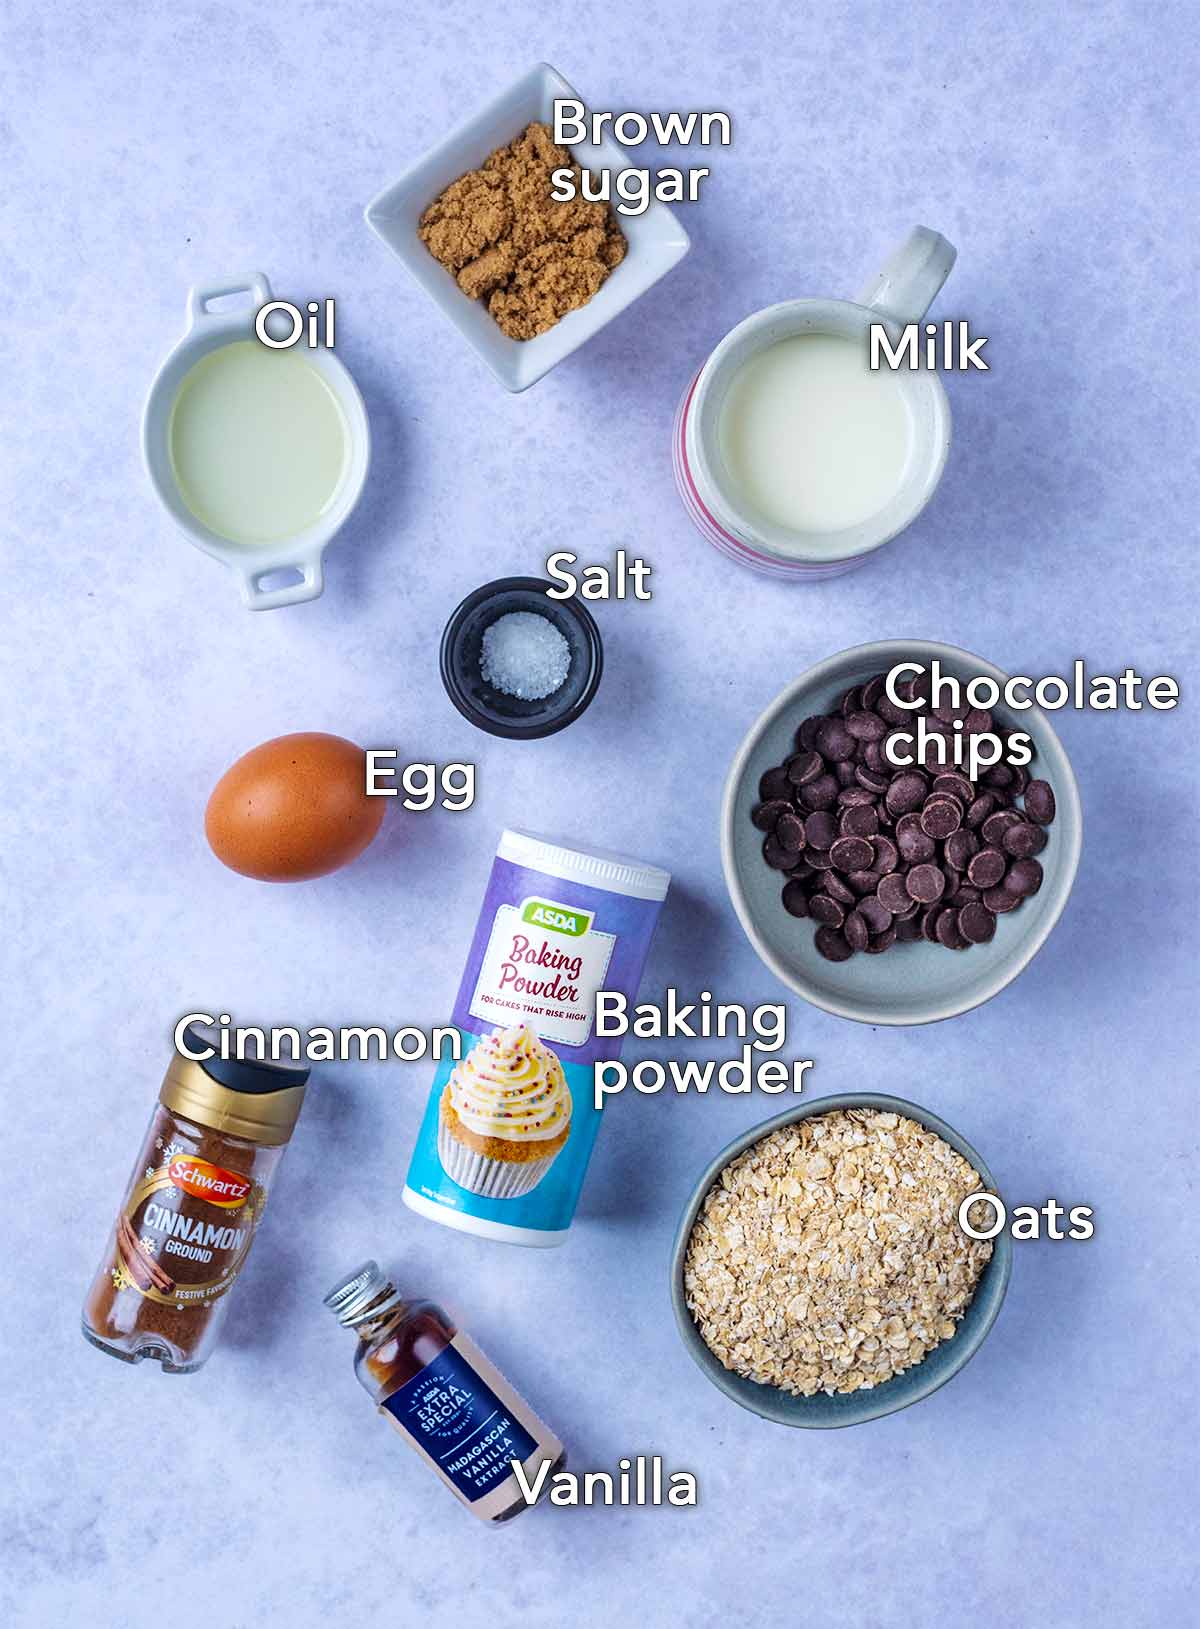 All the ingredients needed for this recipe with text overlay labels.